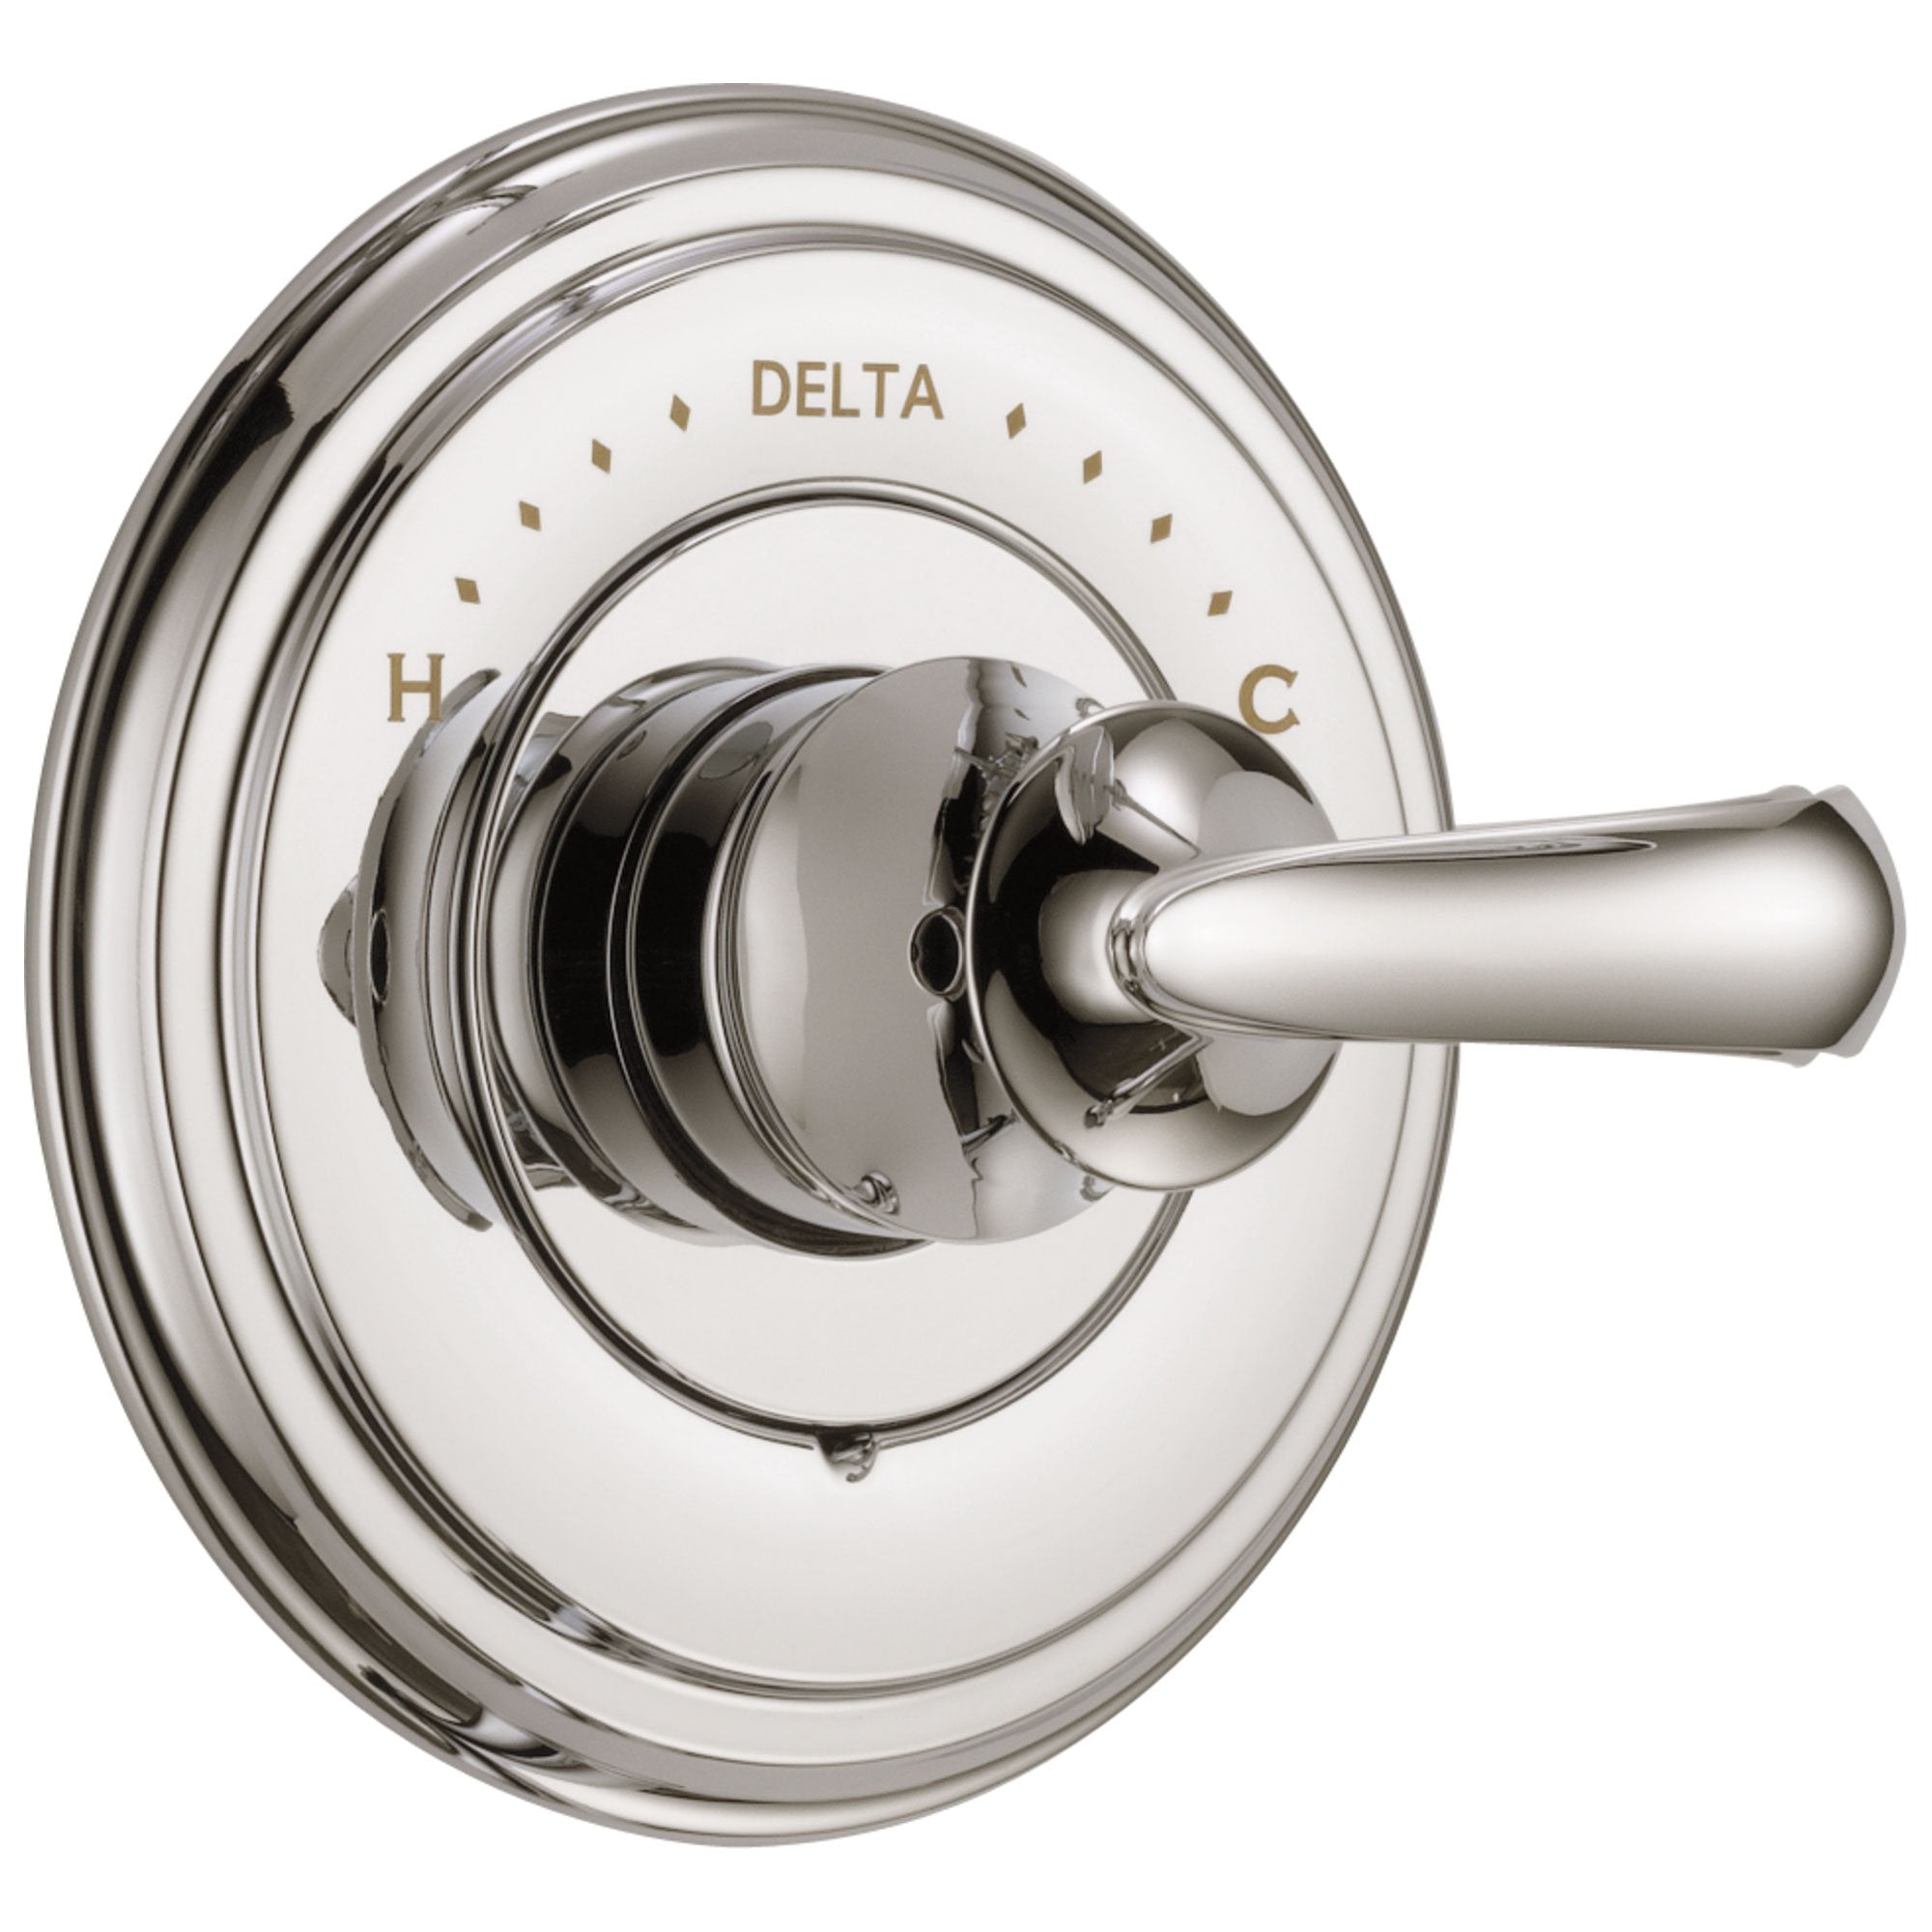 Delta Cassidy Collection Polished Nickel Monitor 14 Series Shower Valve Control Only INCLUDES Single French Scroll Lever Handle and Valve without Stops D1858V